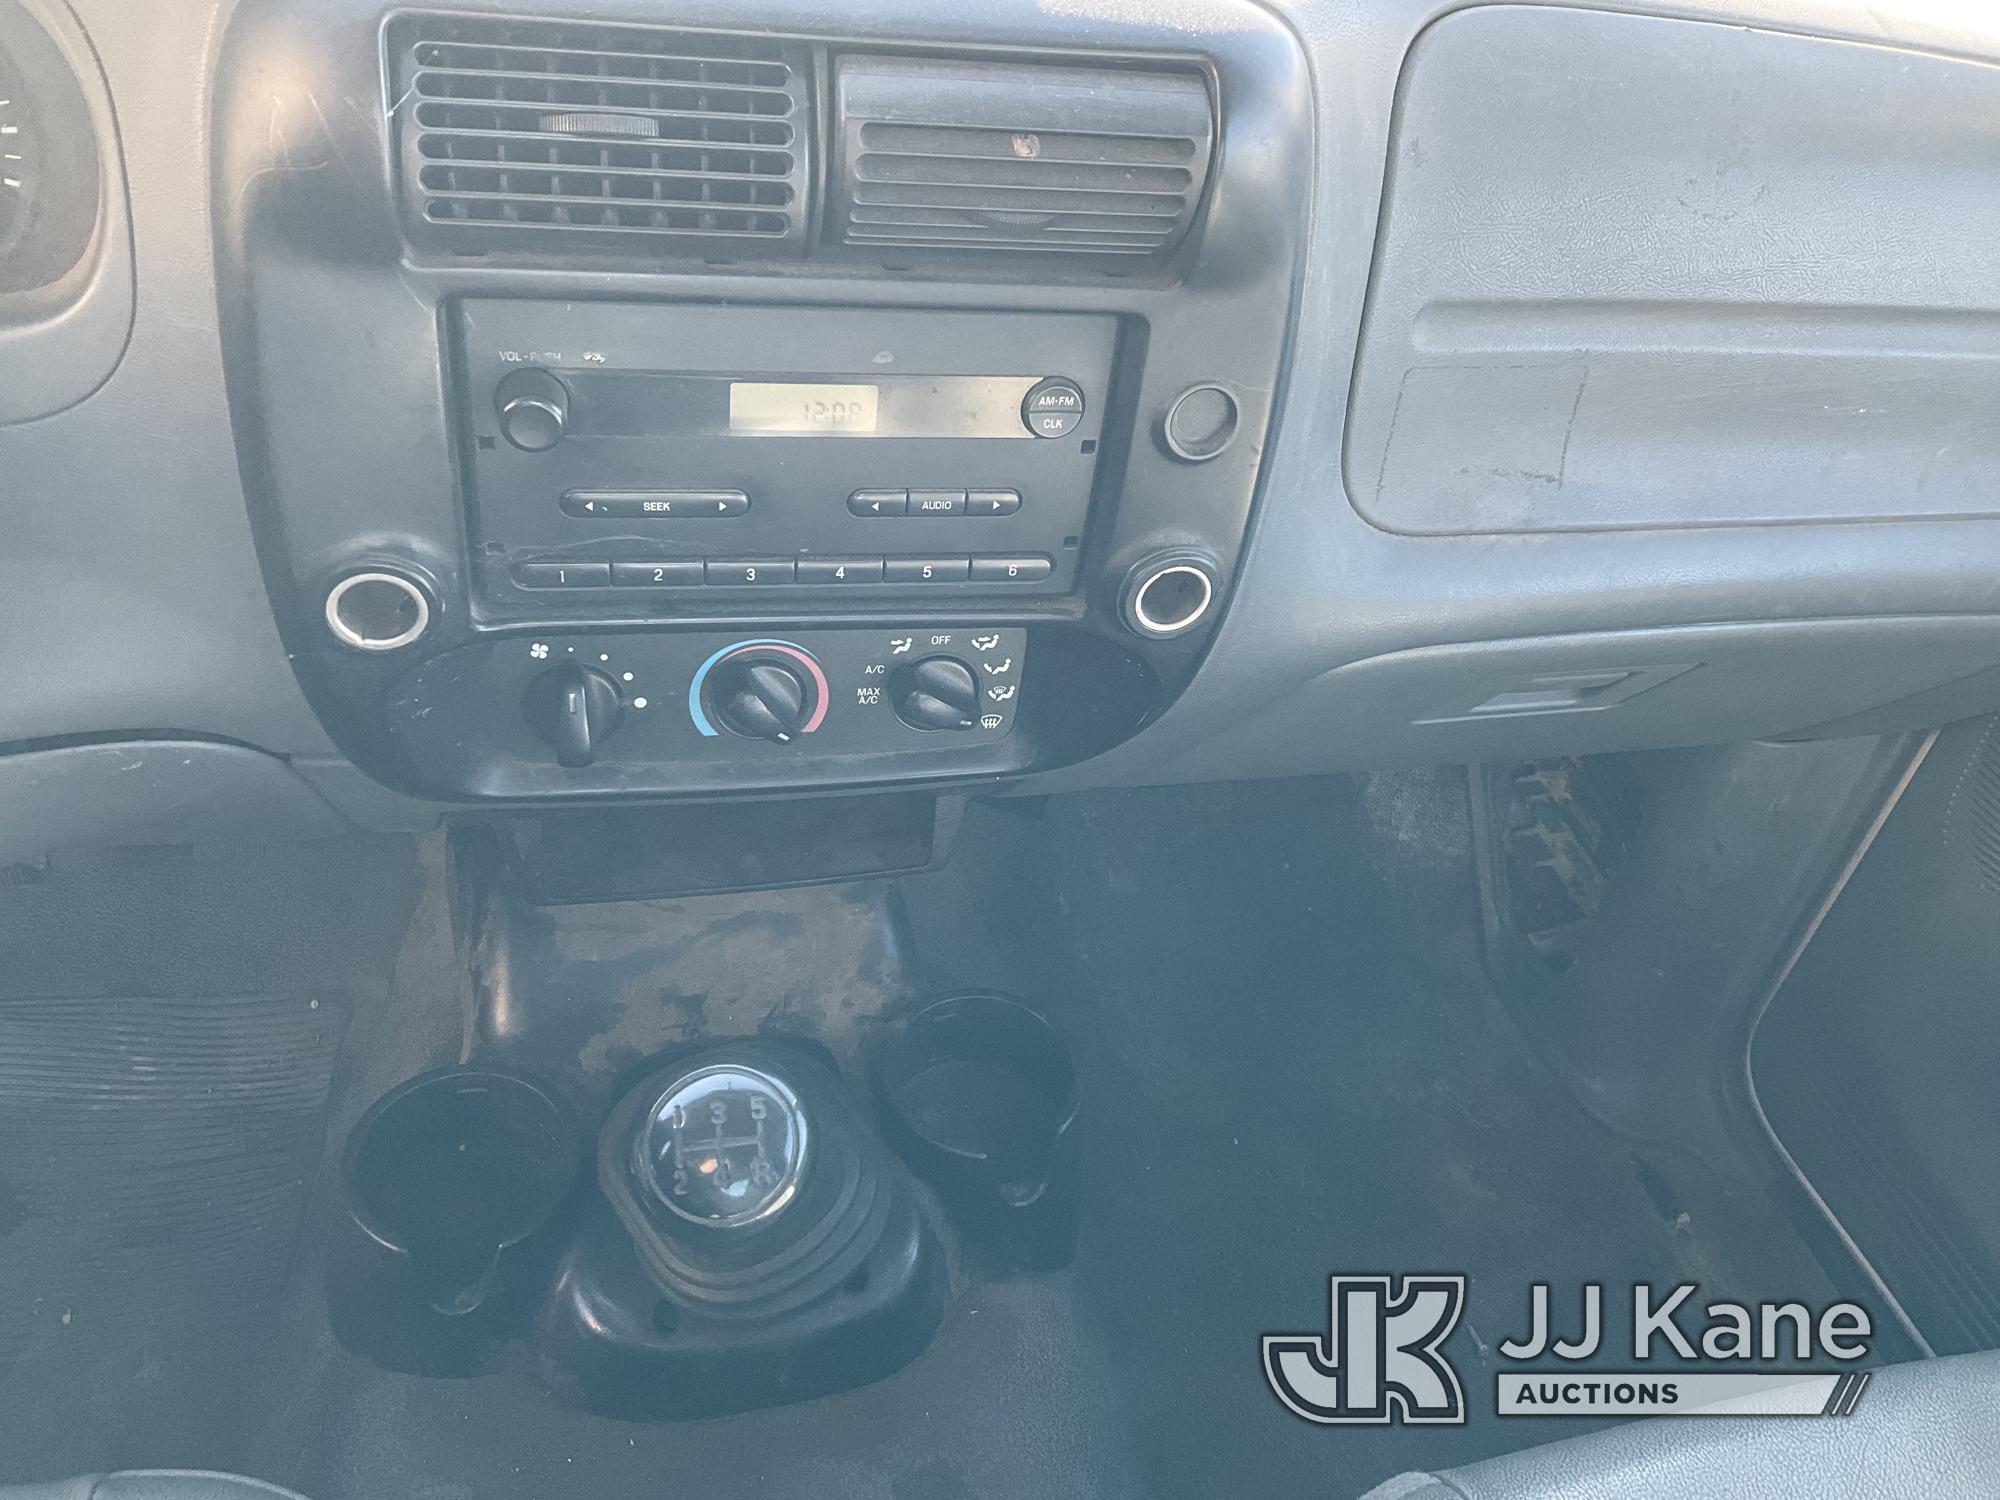 (Jurupa Valley, CA) 2007 Ford Ranger Pickup Truck Runs, Will Not Stay Running Without Jump box, Move